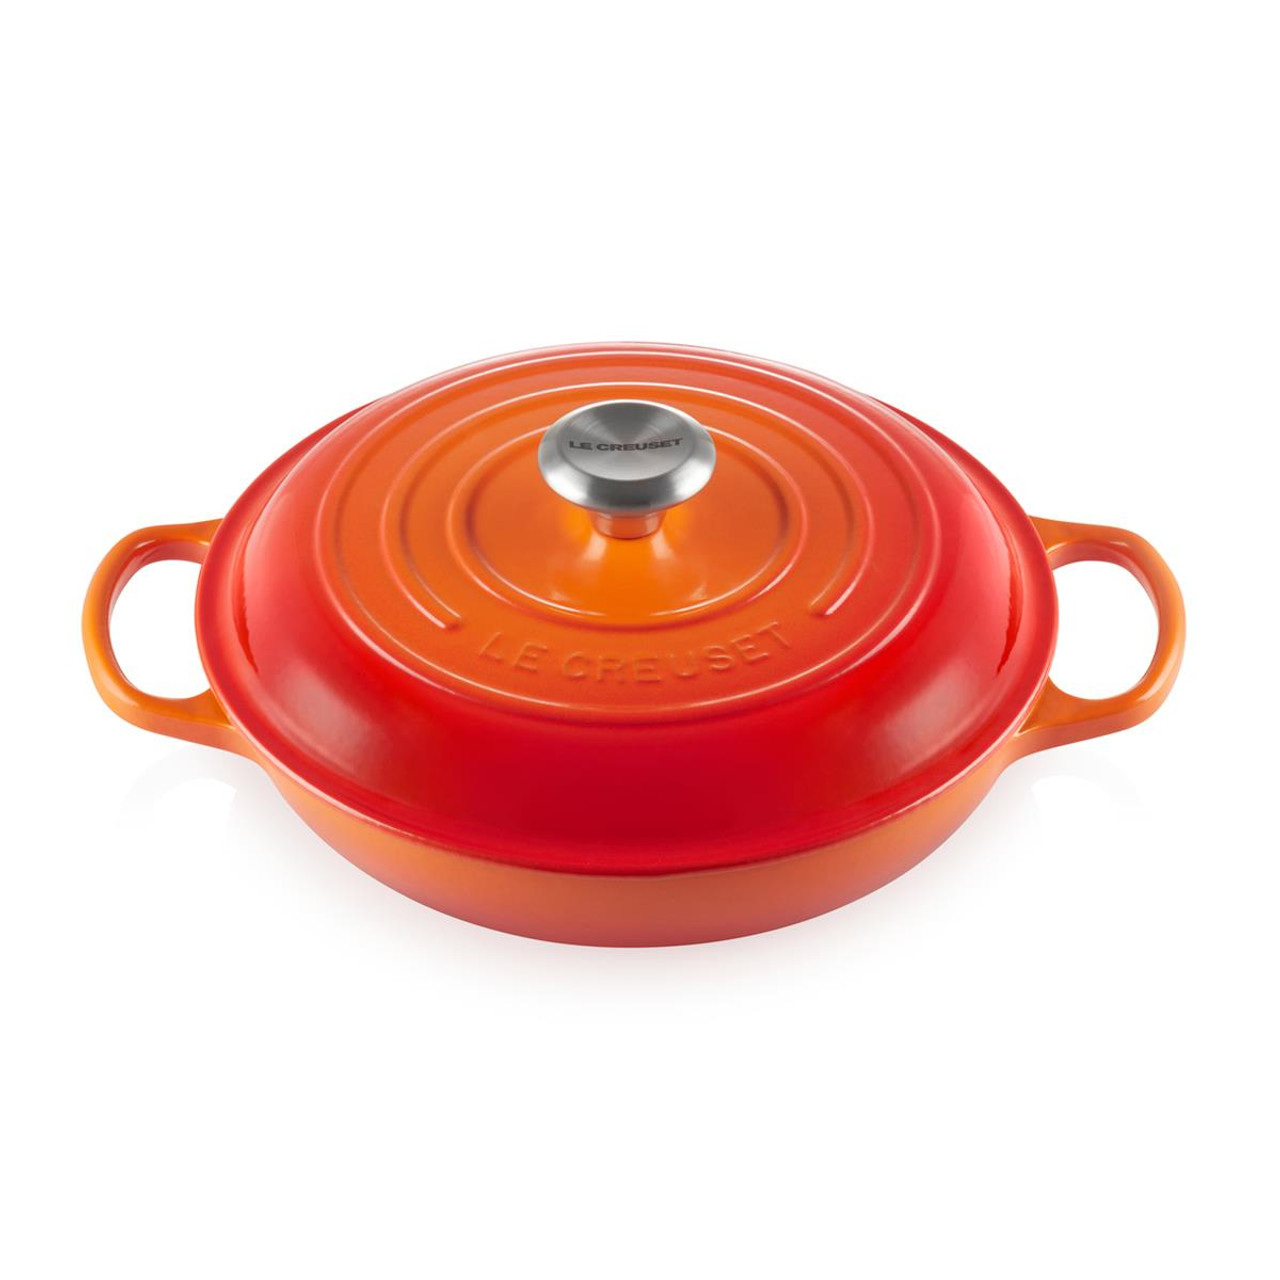 What size is Le Creuset shallow casserole cooking width?